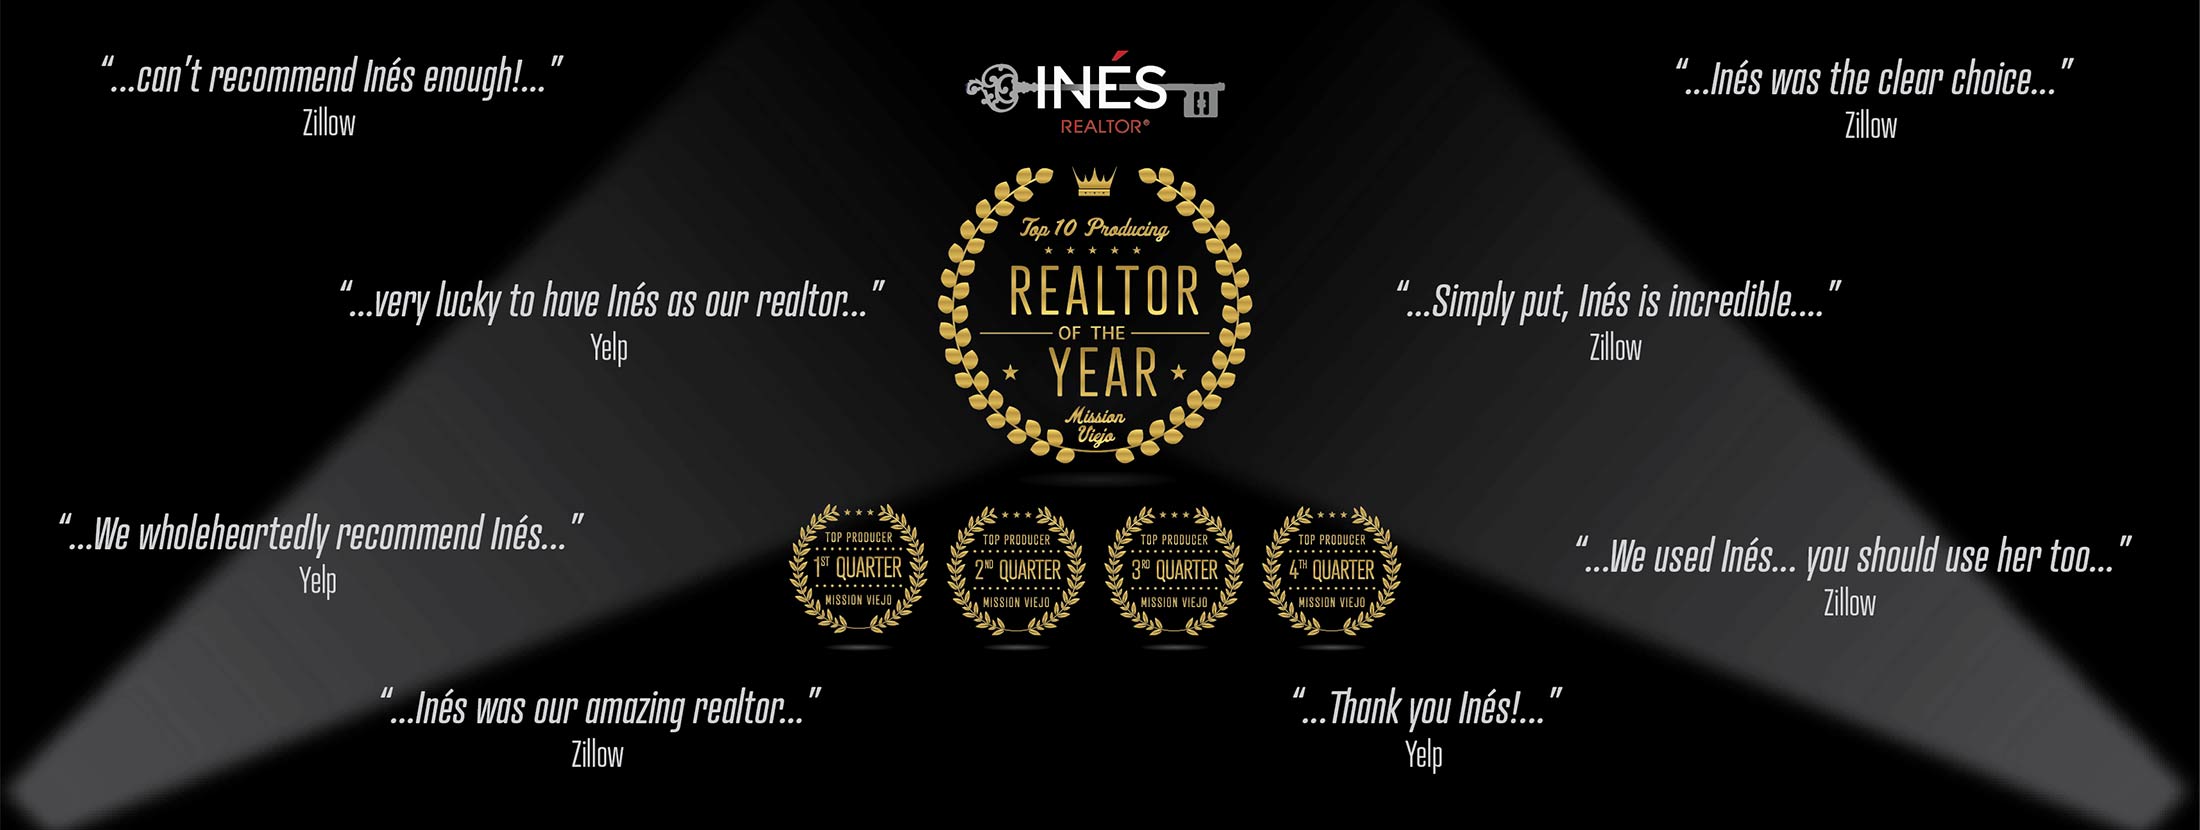 Top 10 Producing Realtor of the Year in Mission Viejo